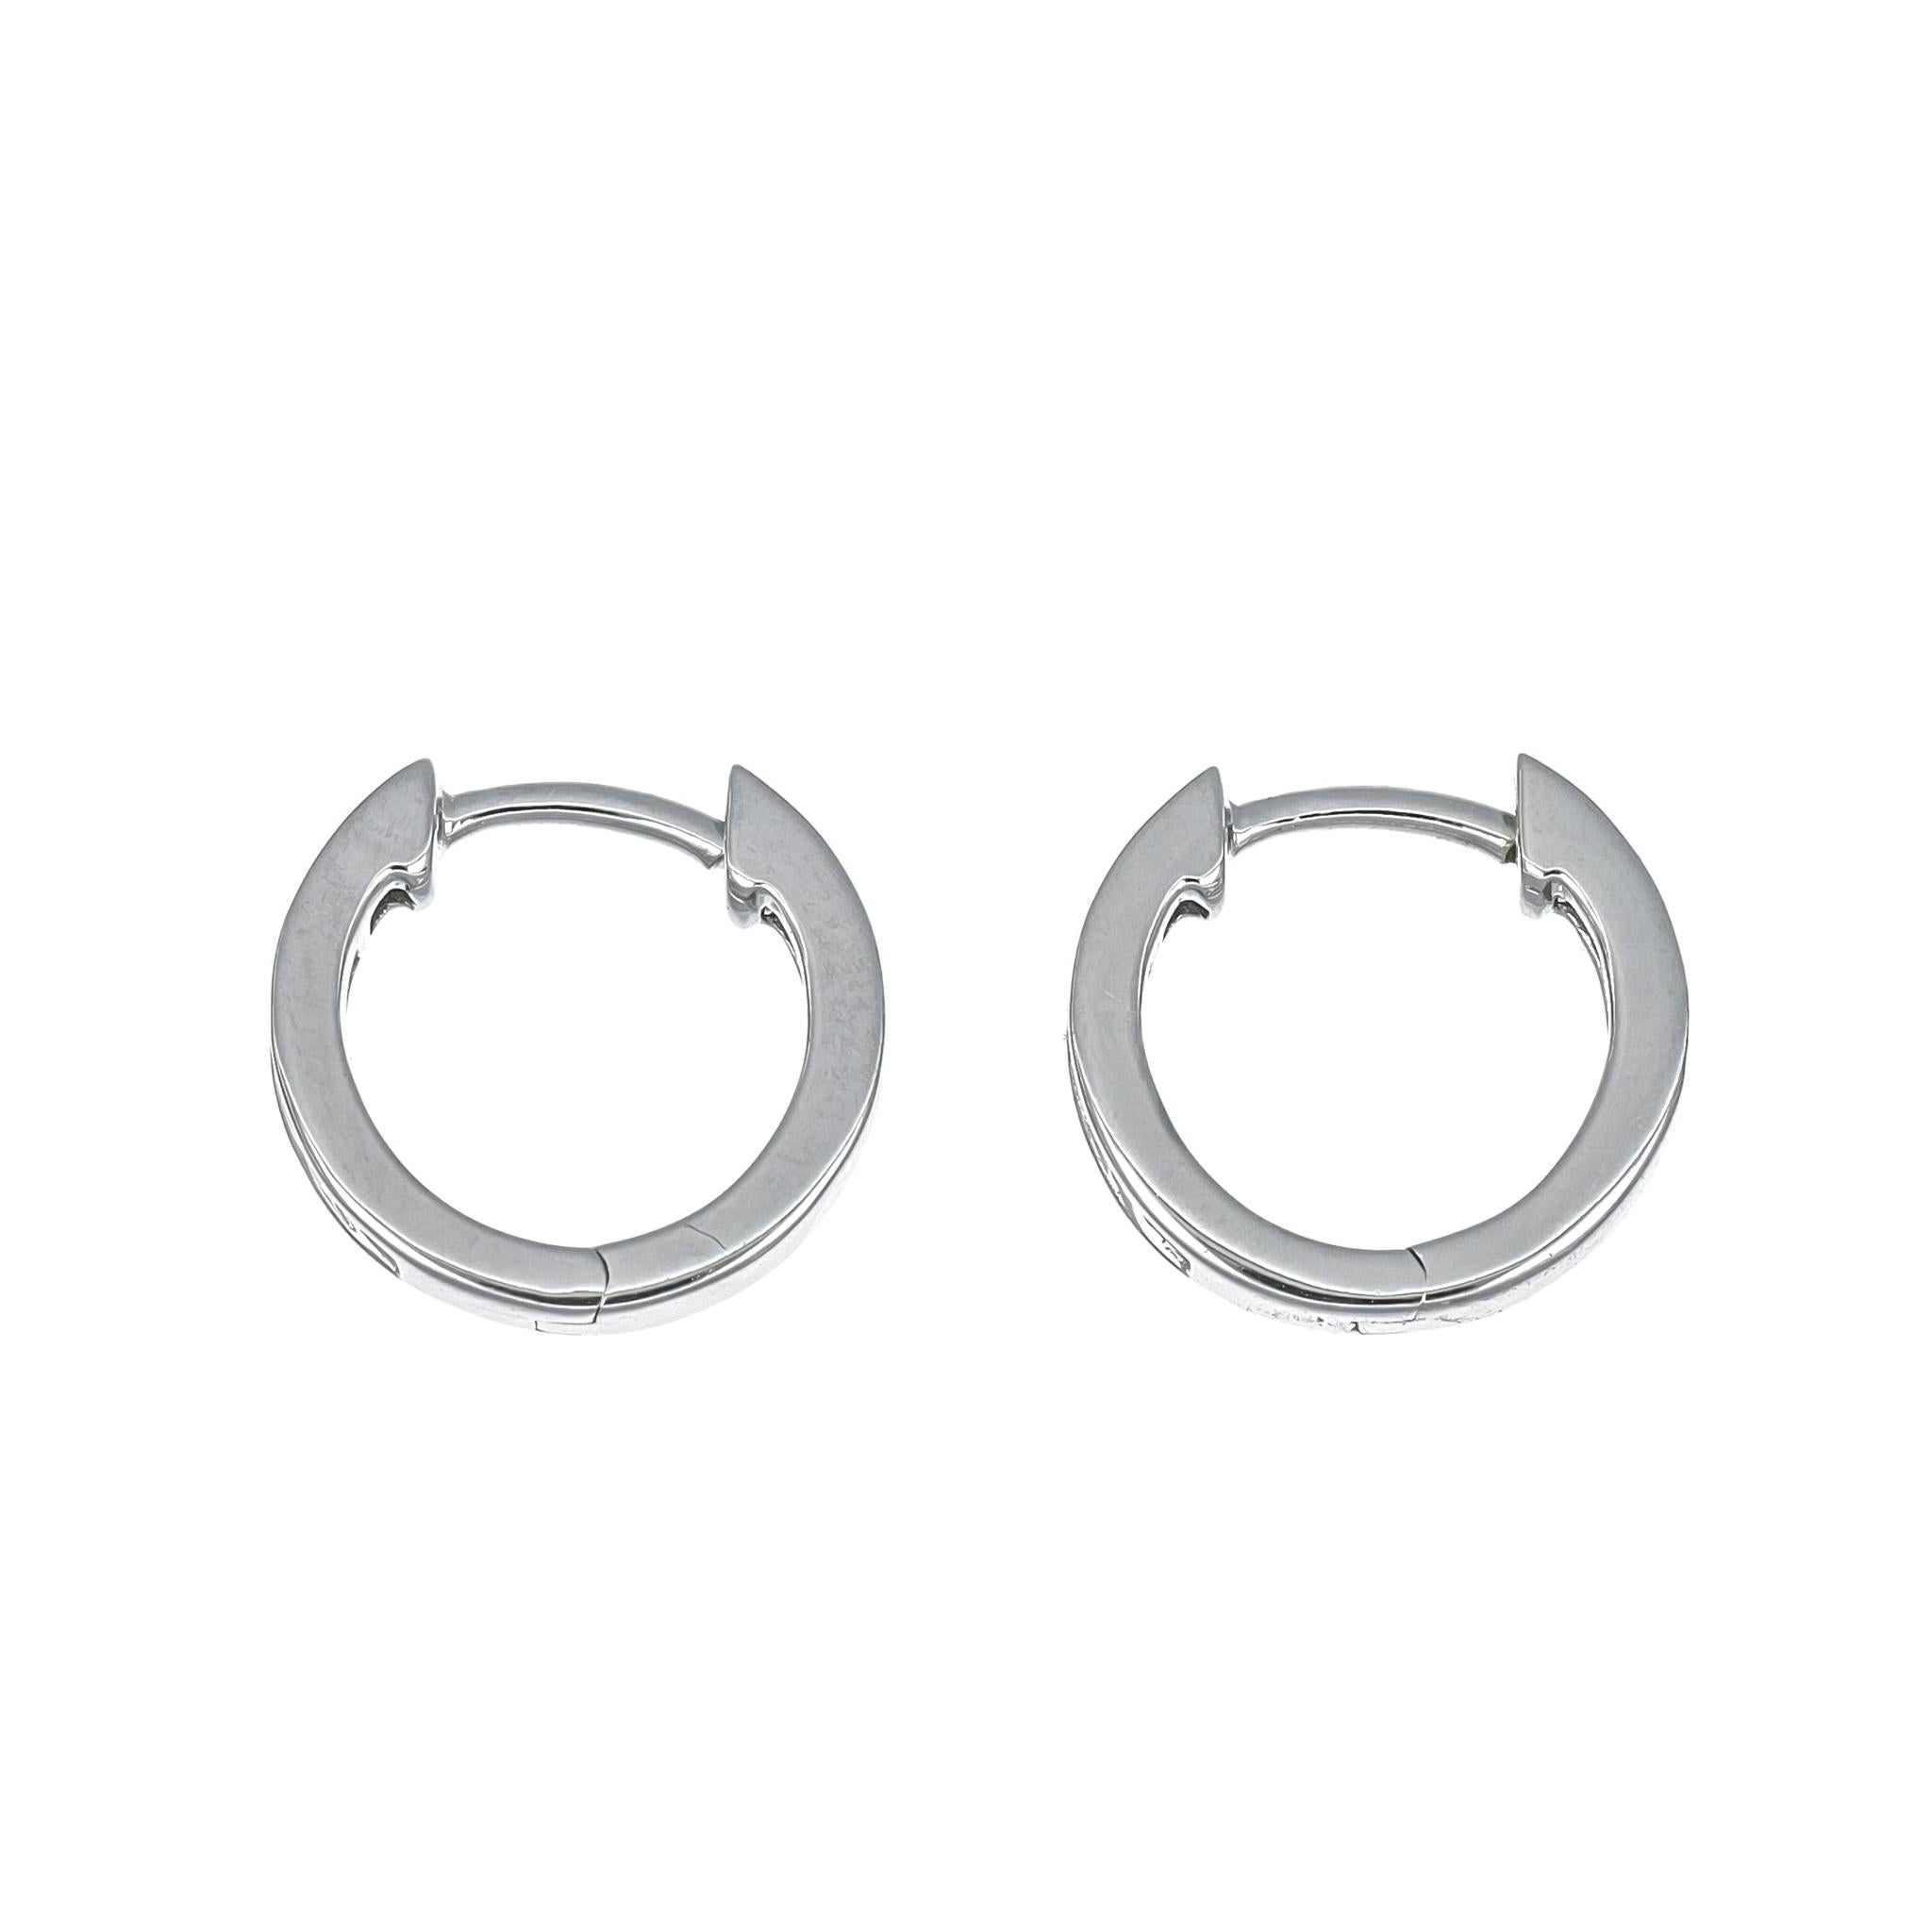 Introducing the epitome of minimalistic beauty, our 18KT White Gold Princess Diamond Half Hoop Huggies with Bezel detailing are a radiant expression of refined elegance. Crafted with meticulous attention to detail, these earrings boast a simple yet